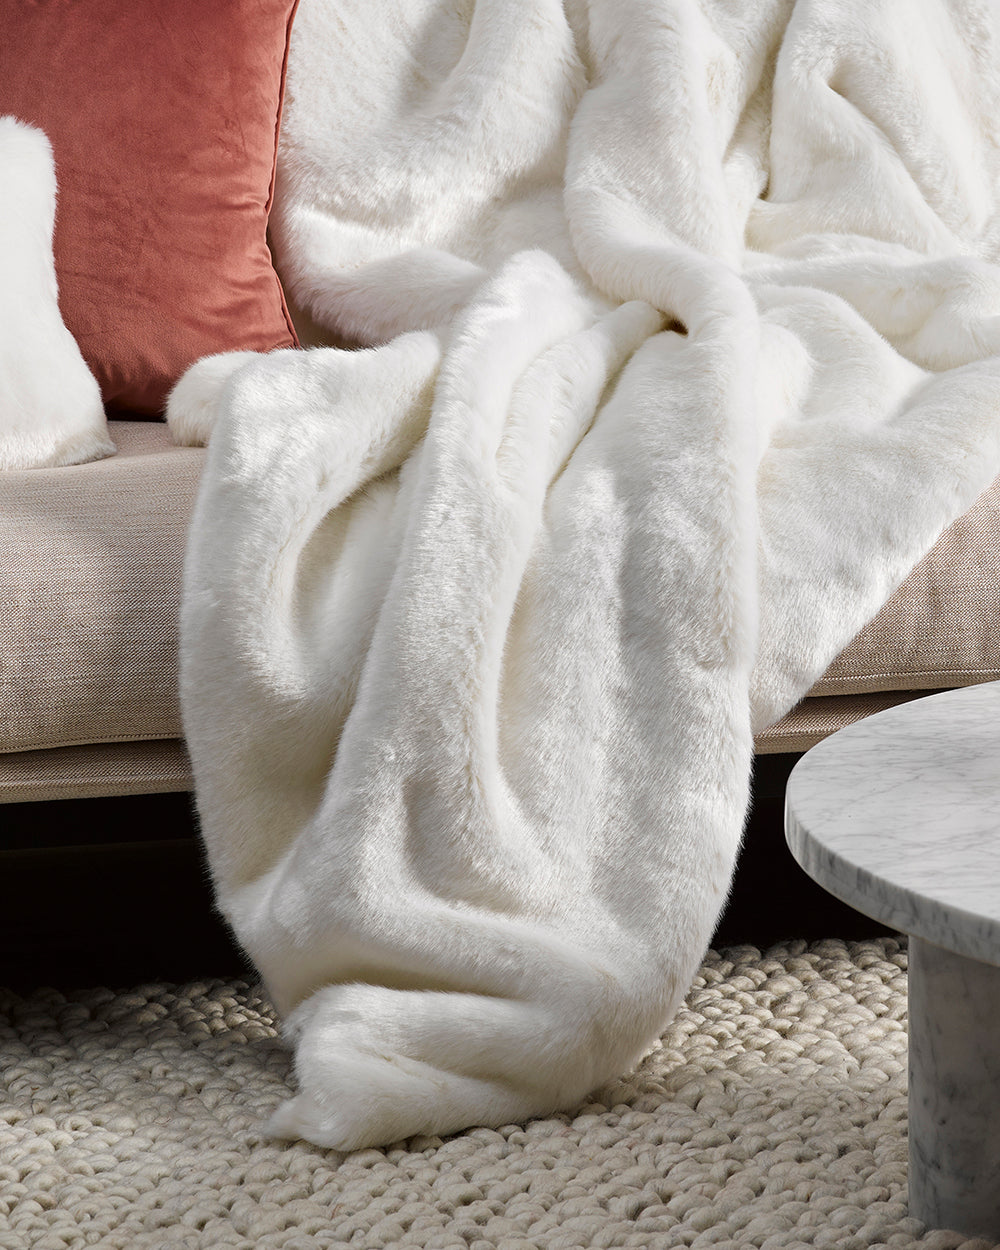 Heirloom Polar Bear Throw Rug Blanket in Faux Fur is available from Make Your House A Home Premium Stockist. Furniture Store Bendigo, Victoria. Australia Wide Delivery.